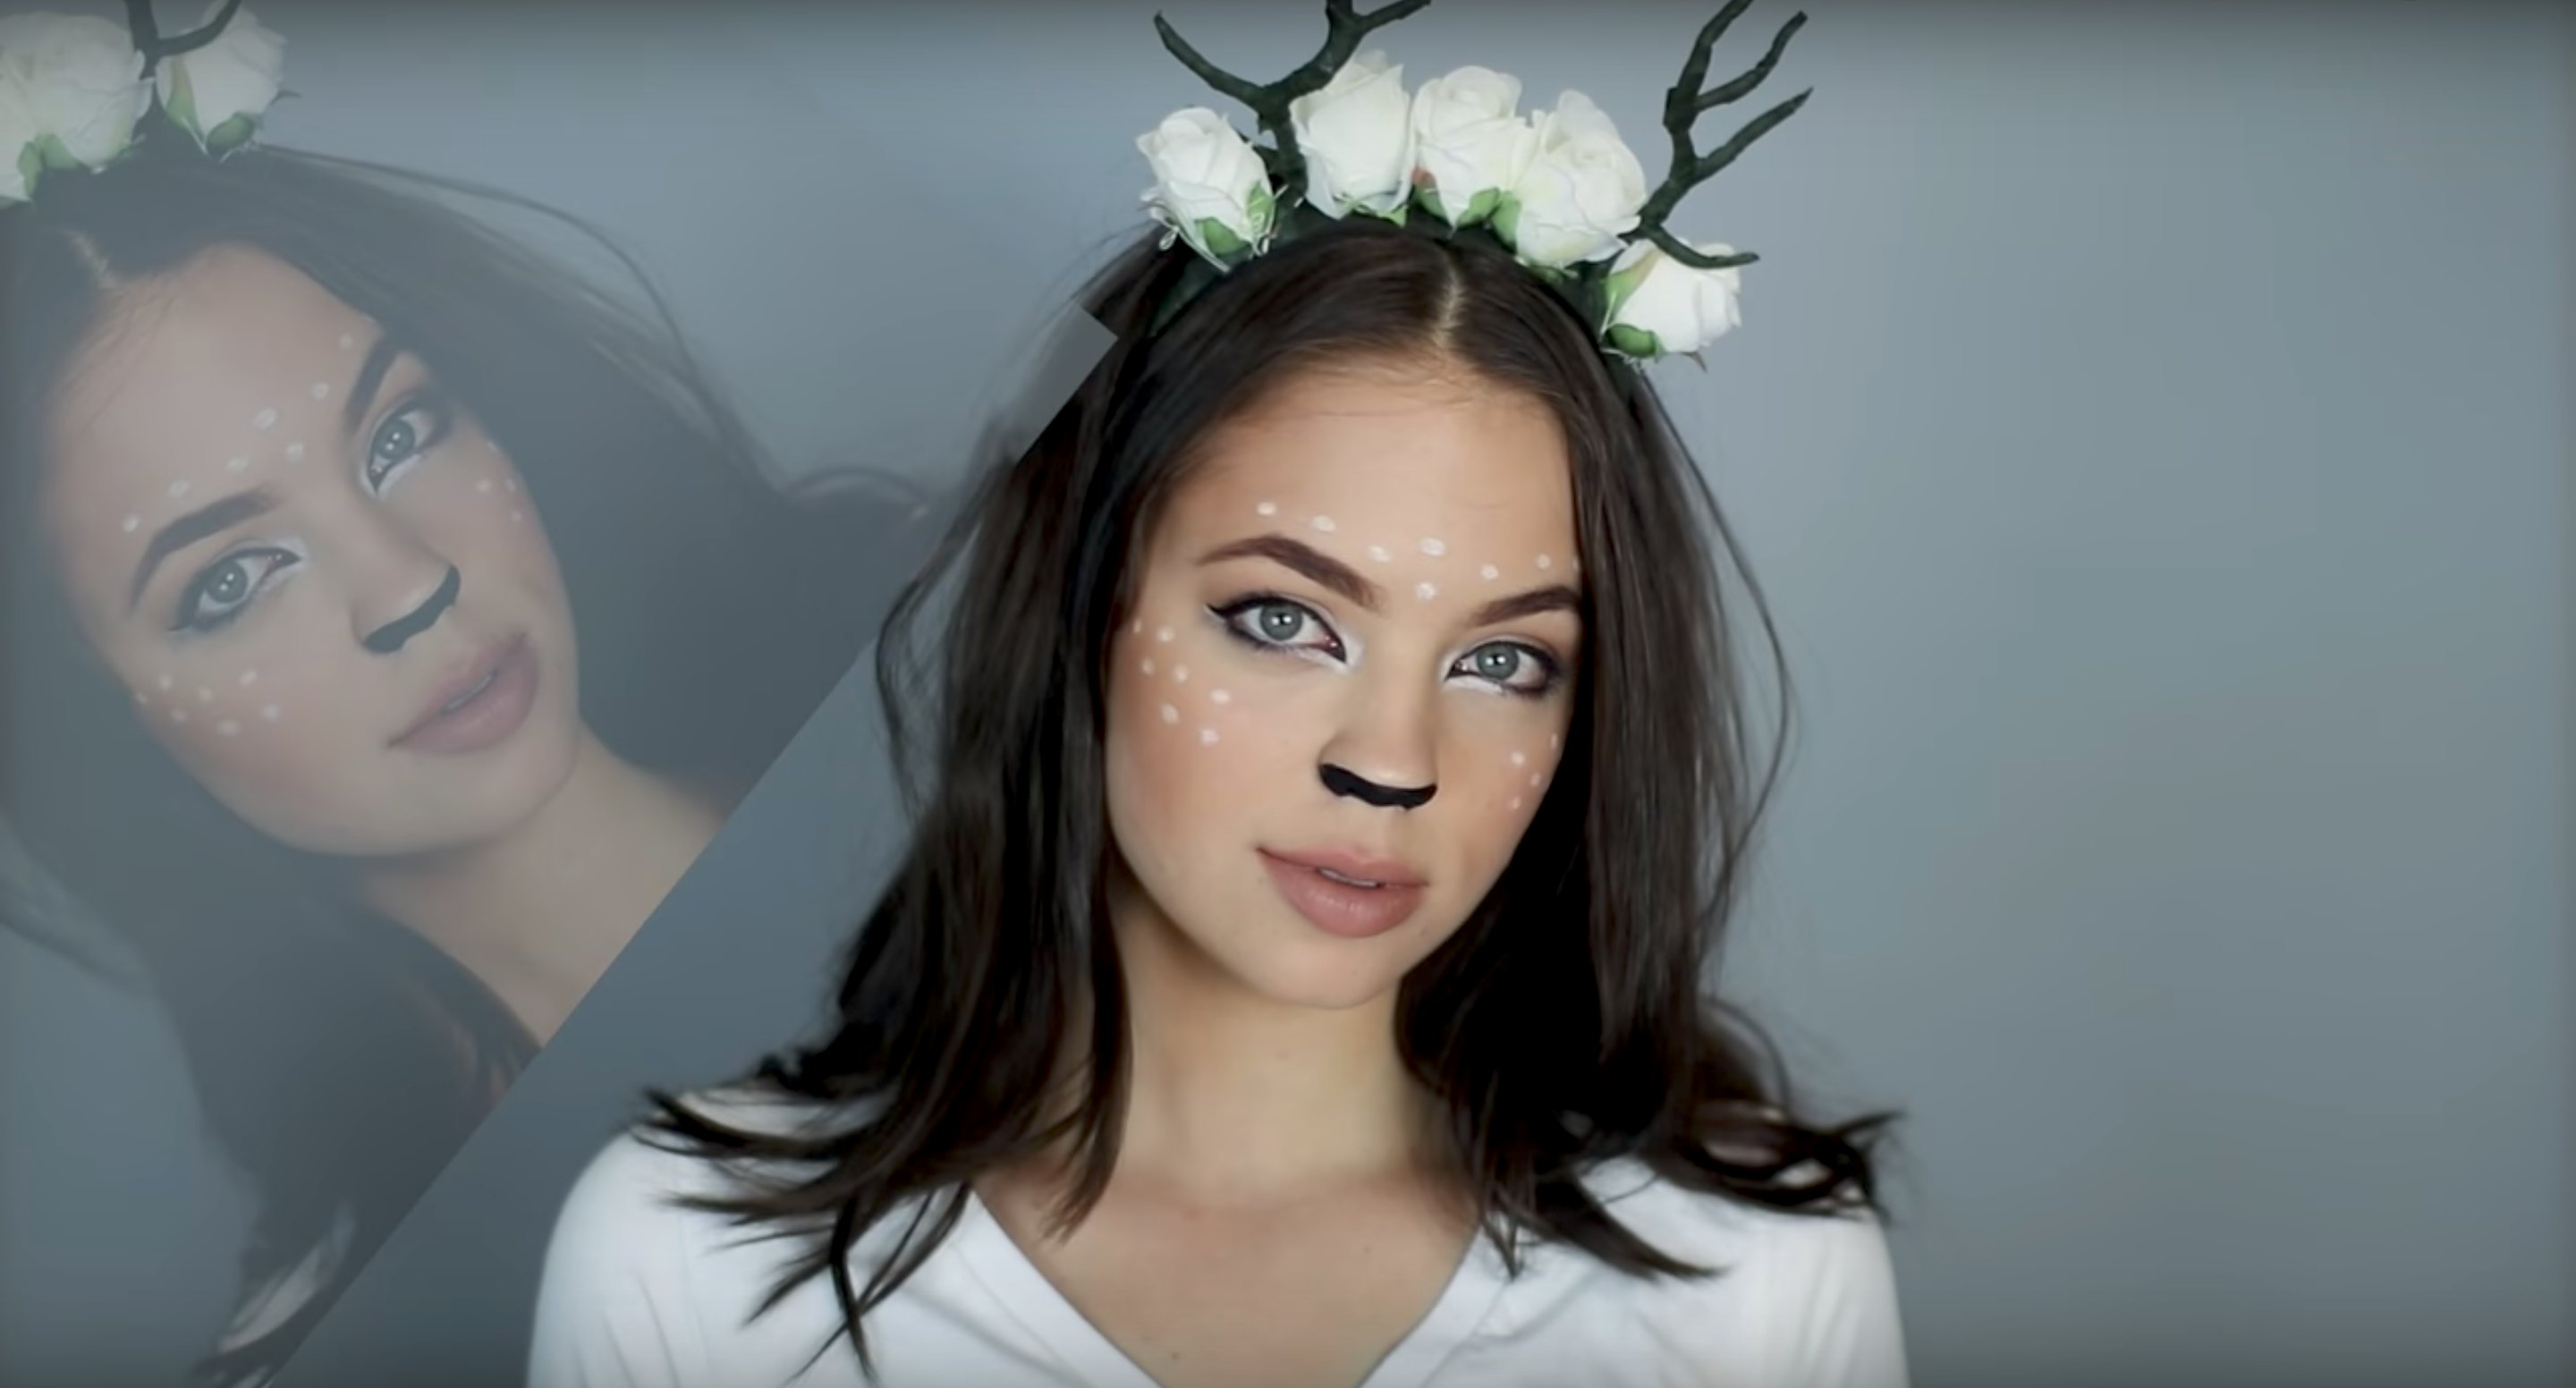 14 Easy Halloween Makeup Tutorials For The Laziest Costumes Ever